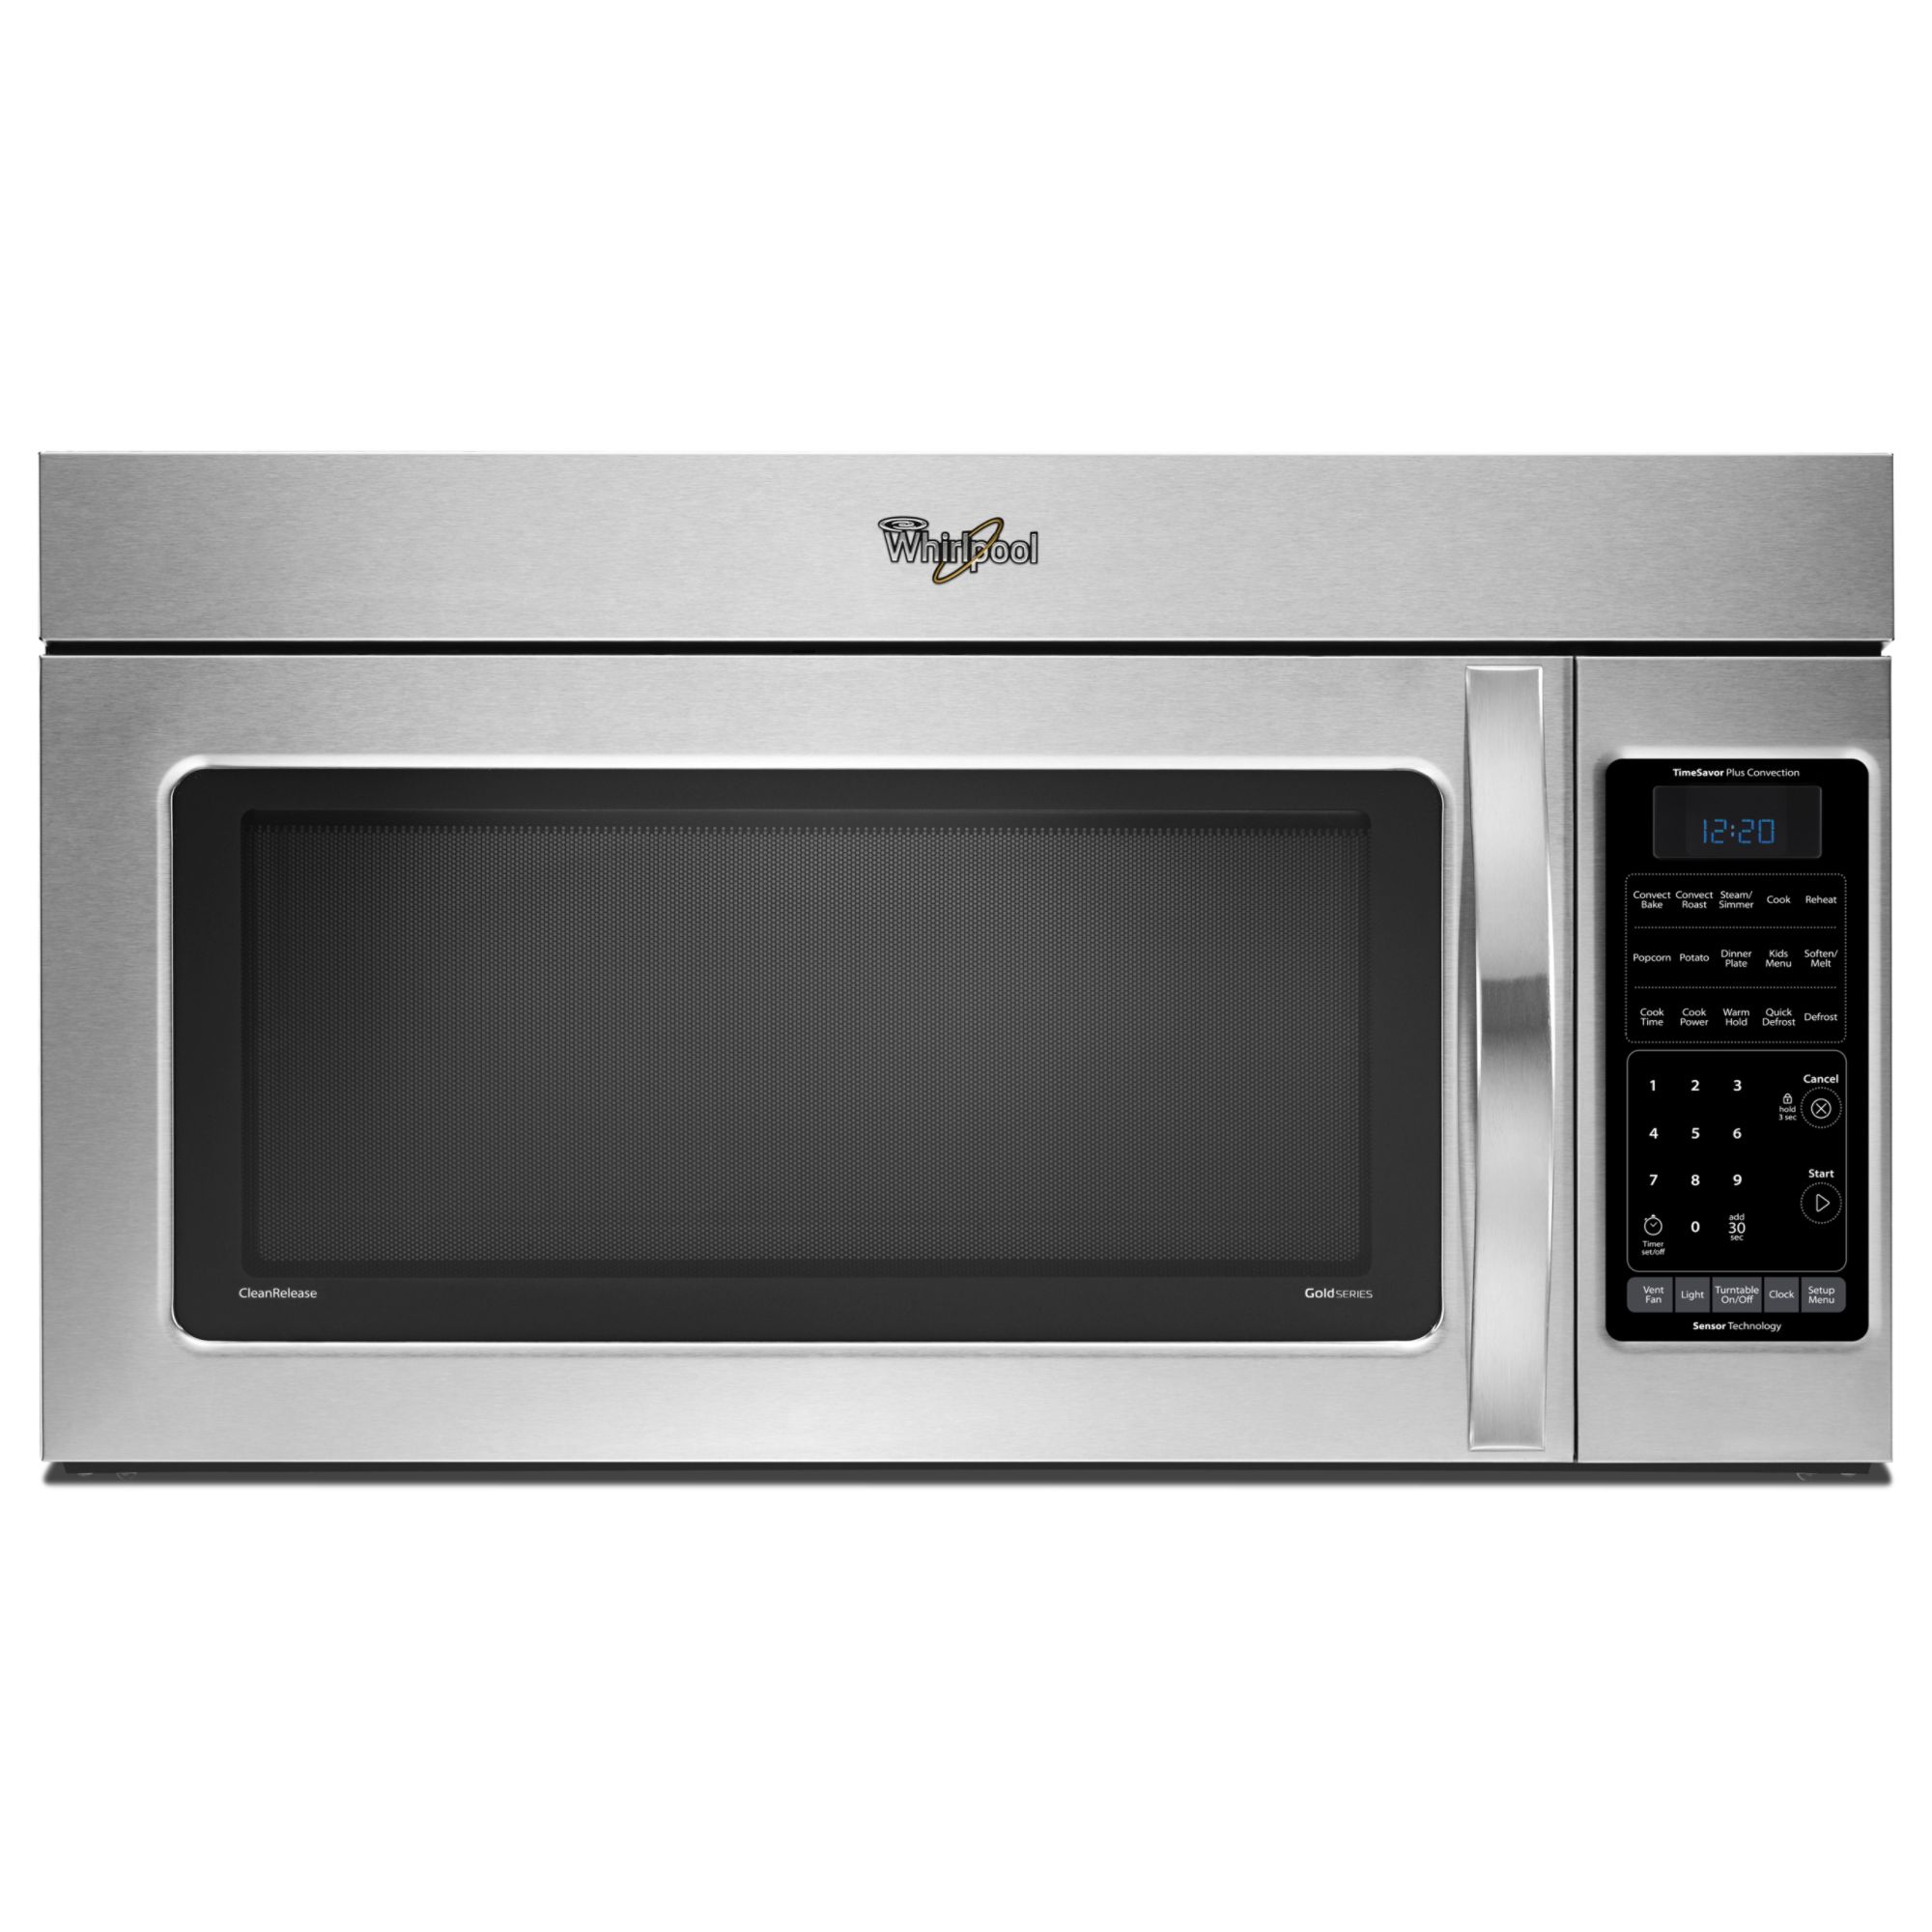 Whirlpool 1.8 cu. ft. Over-the-Range Microwave w/ 4-Speed 300 CFM Fan - Stainless Steel